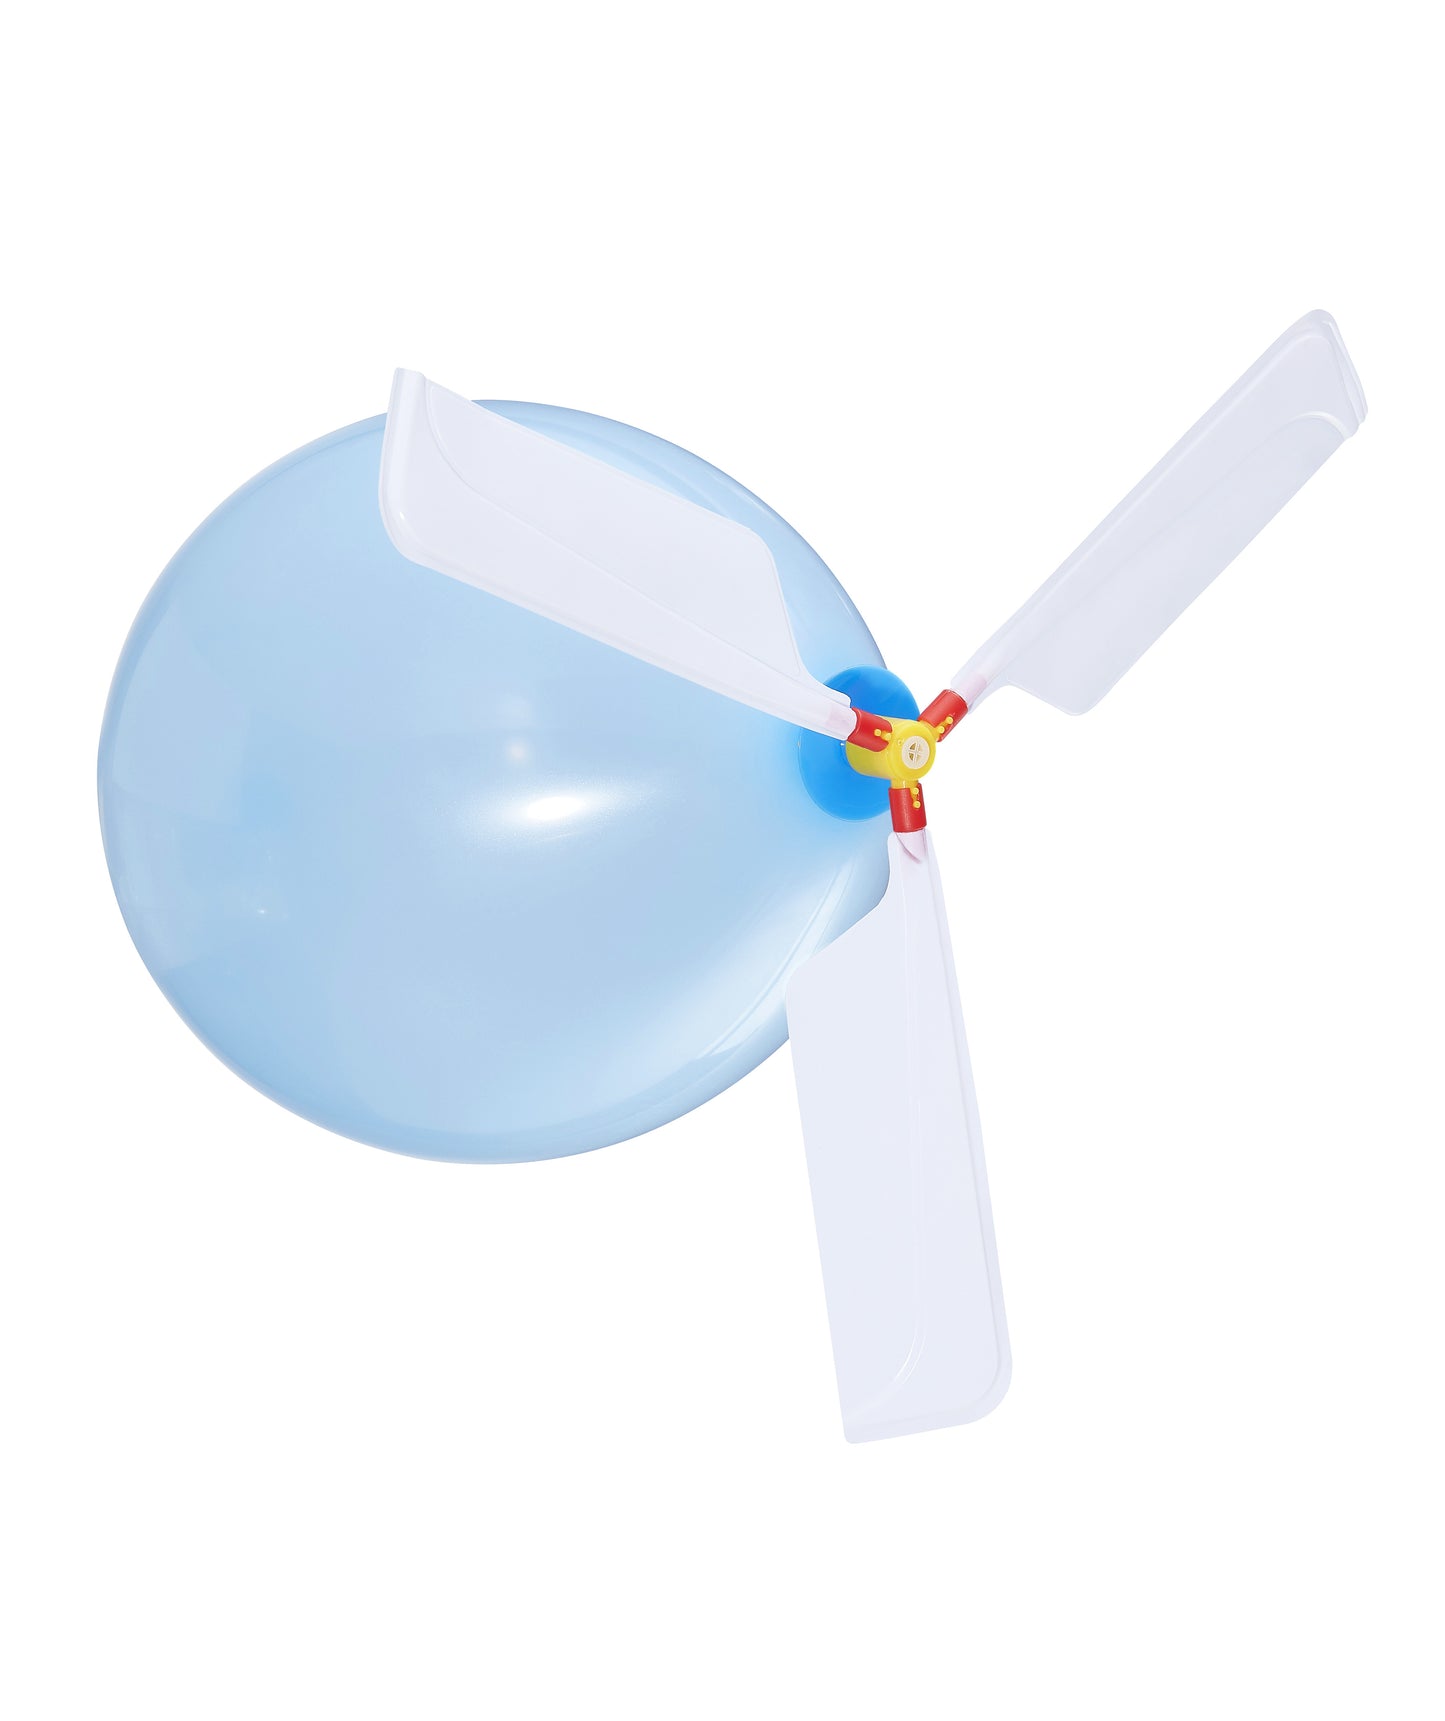 Playground Classics Balloon Helicopter